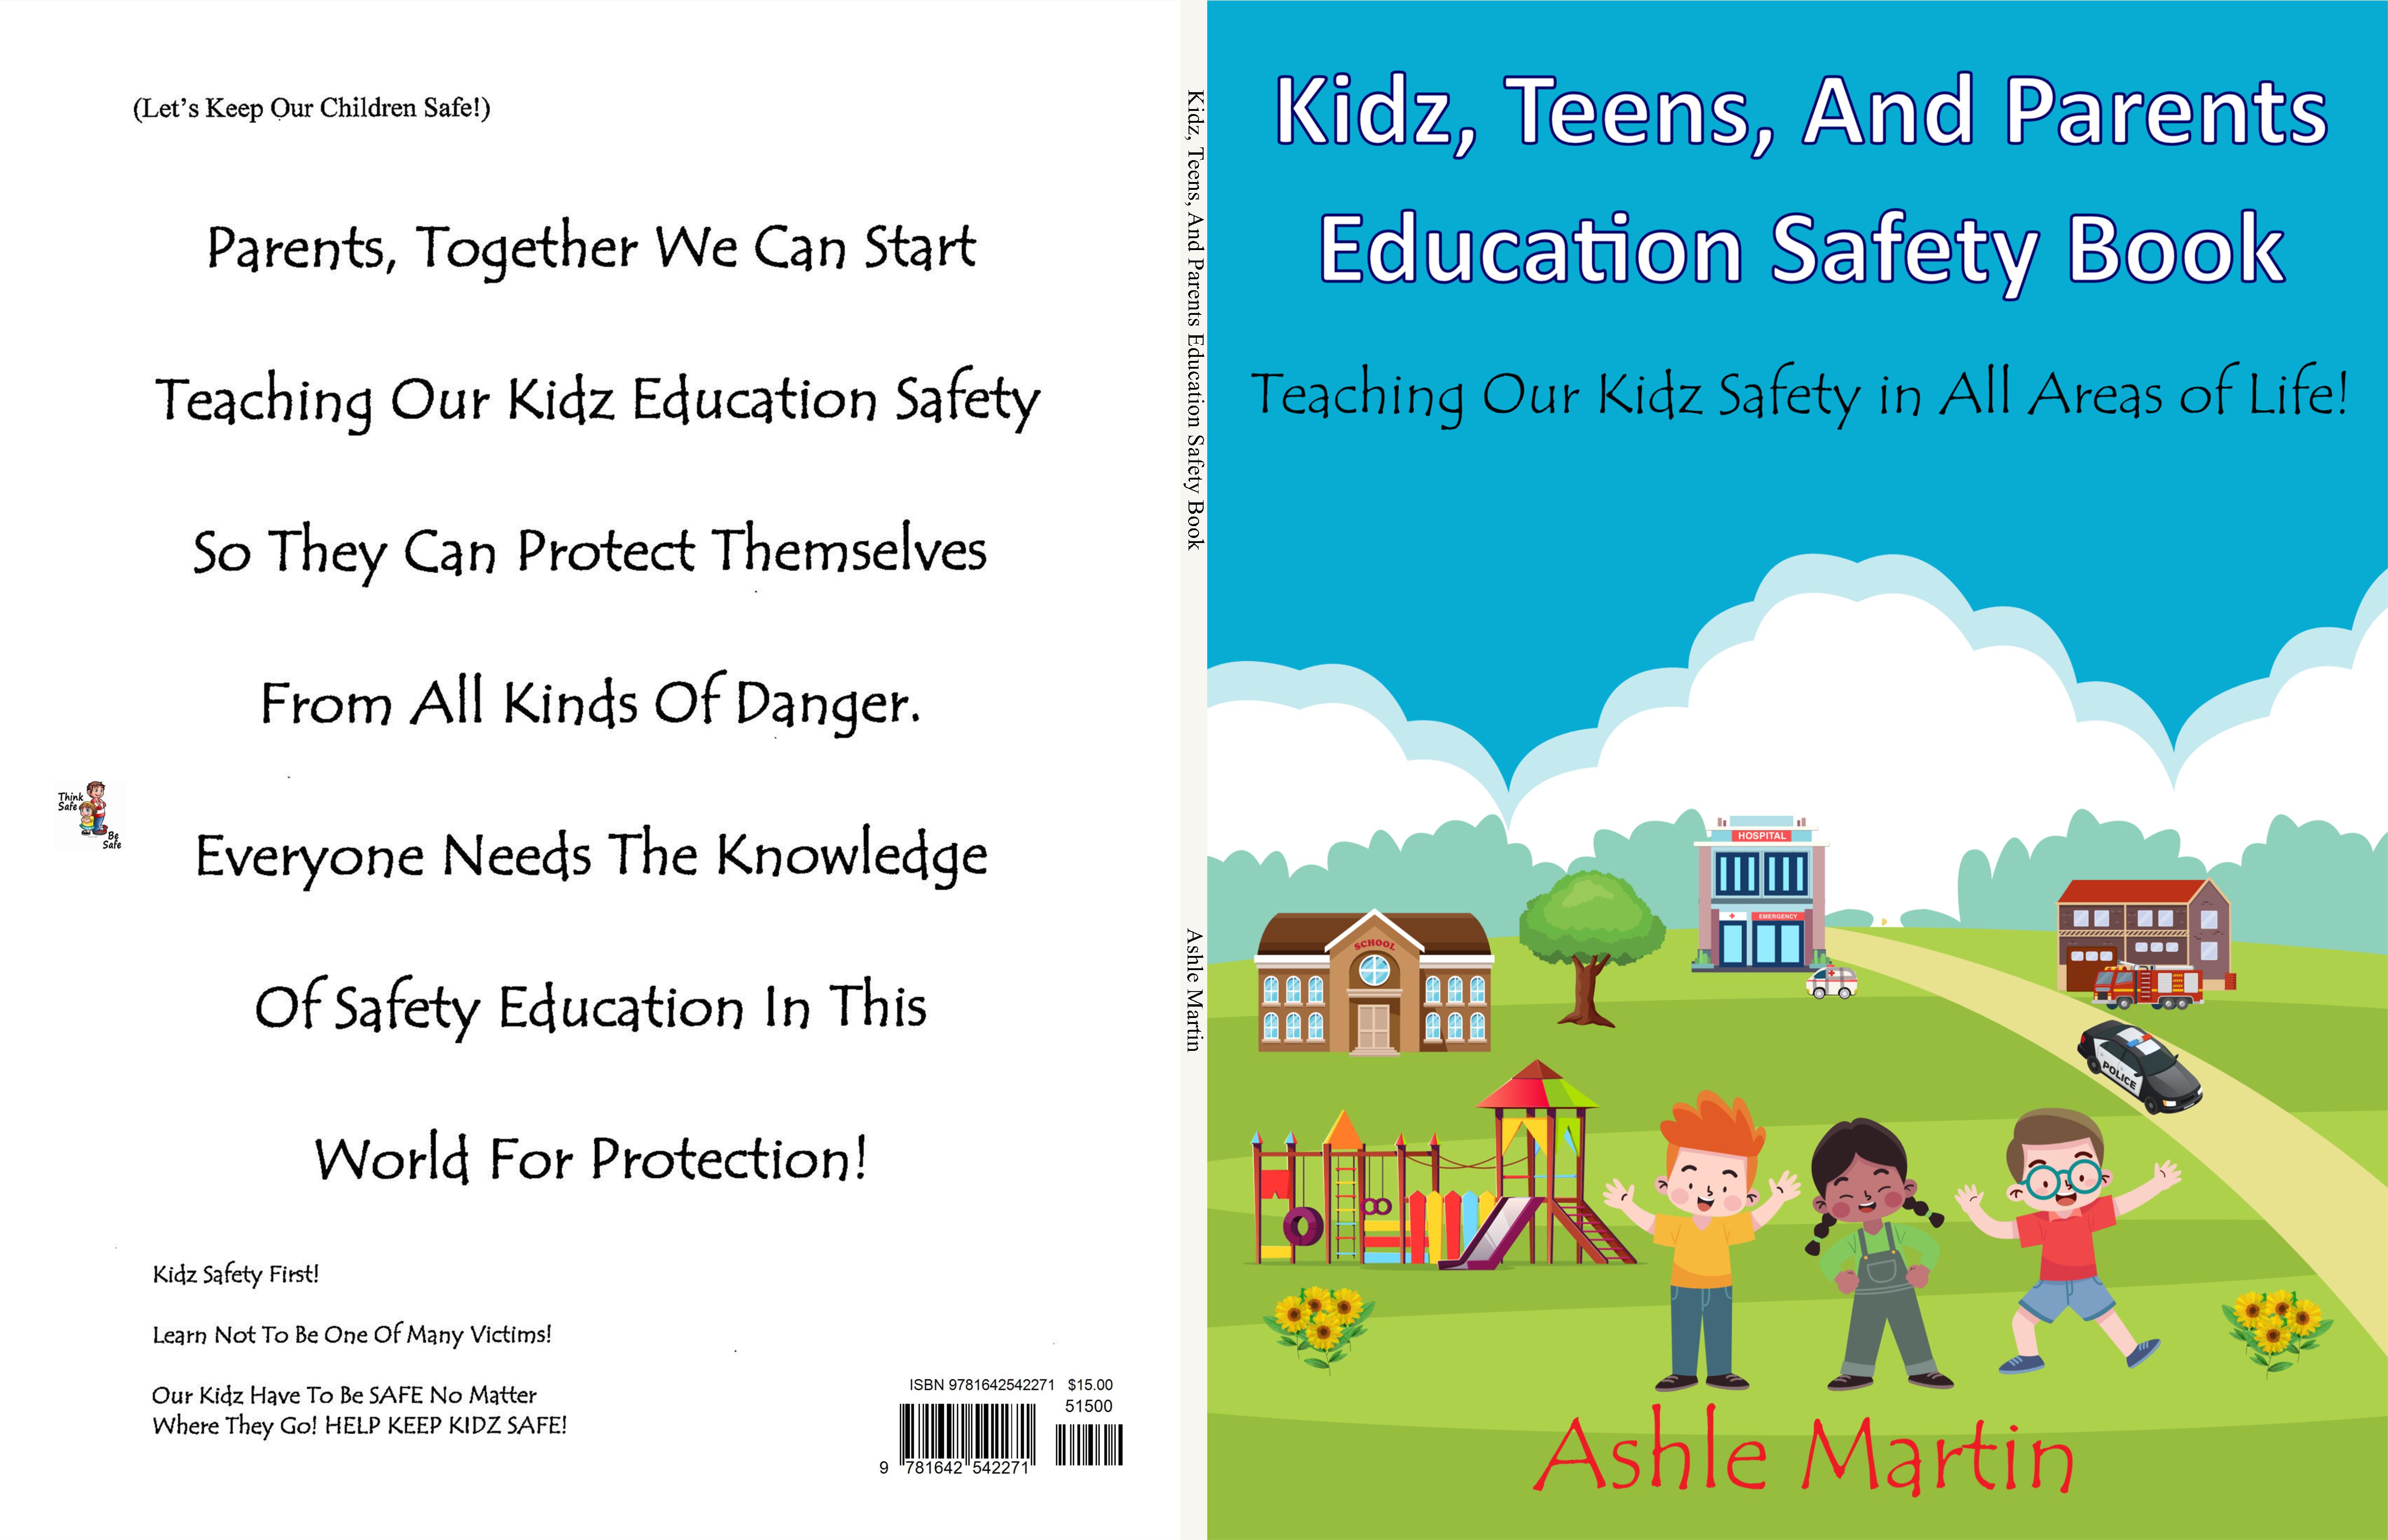 Kidz, Teens, And Parents Education Safety Book cover image